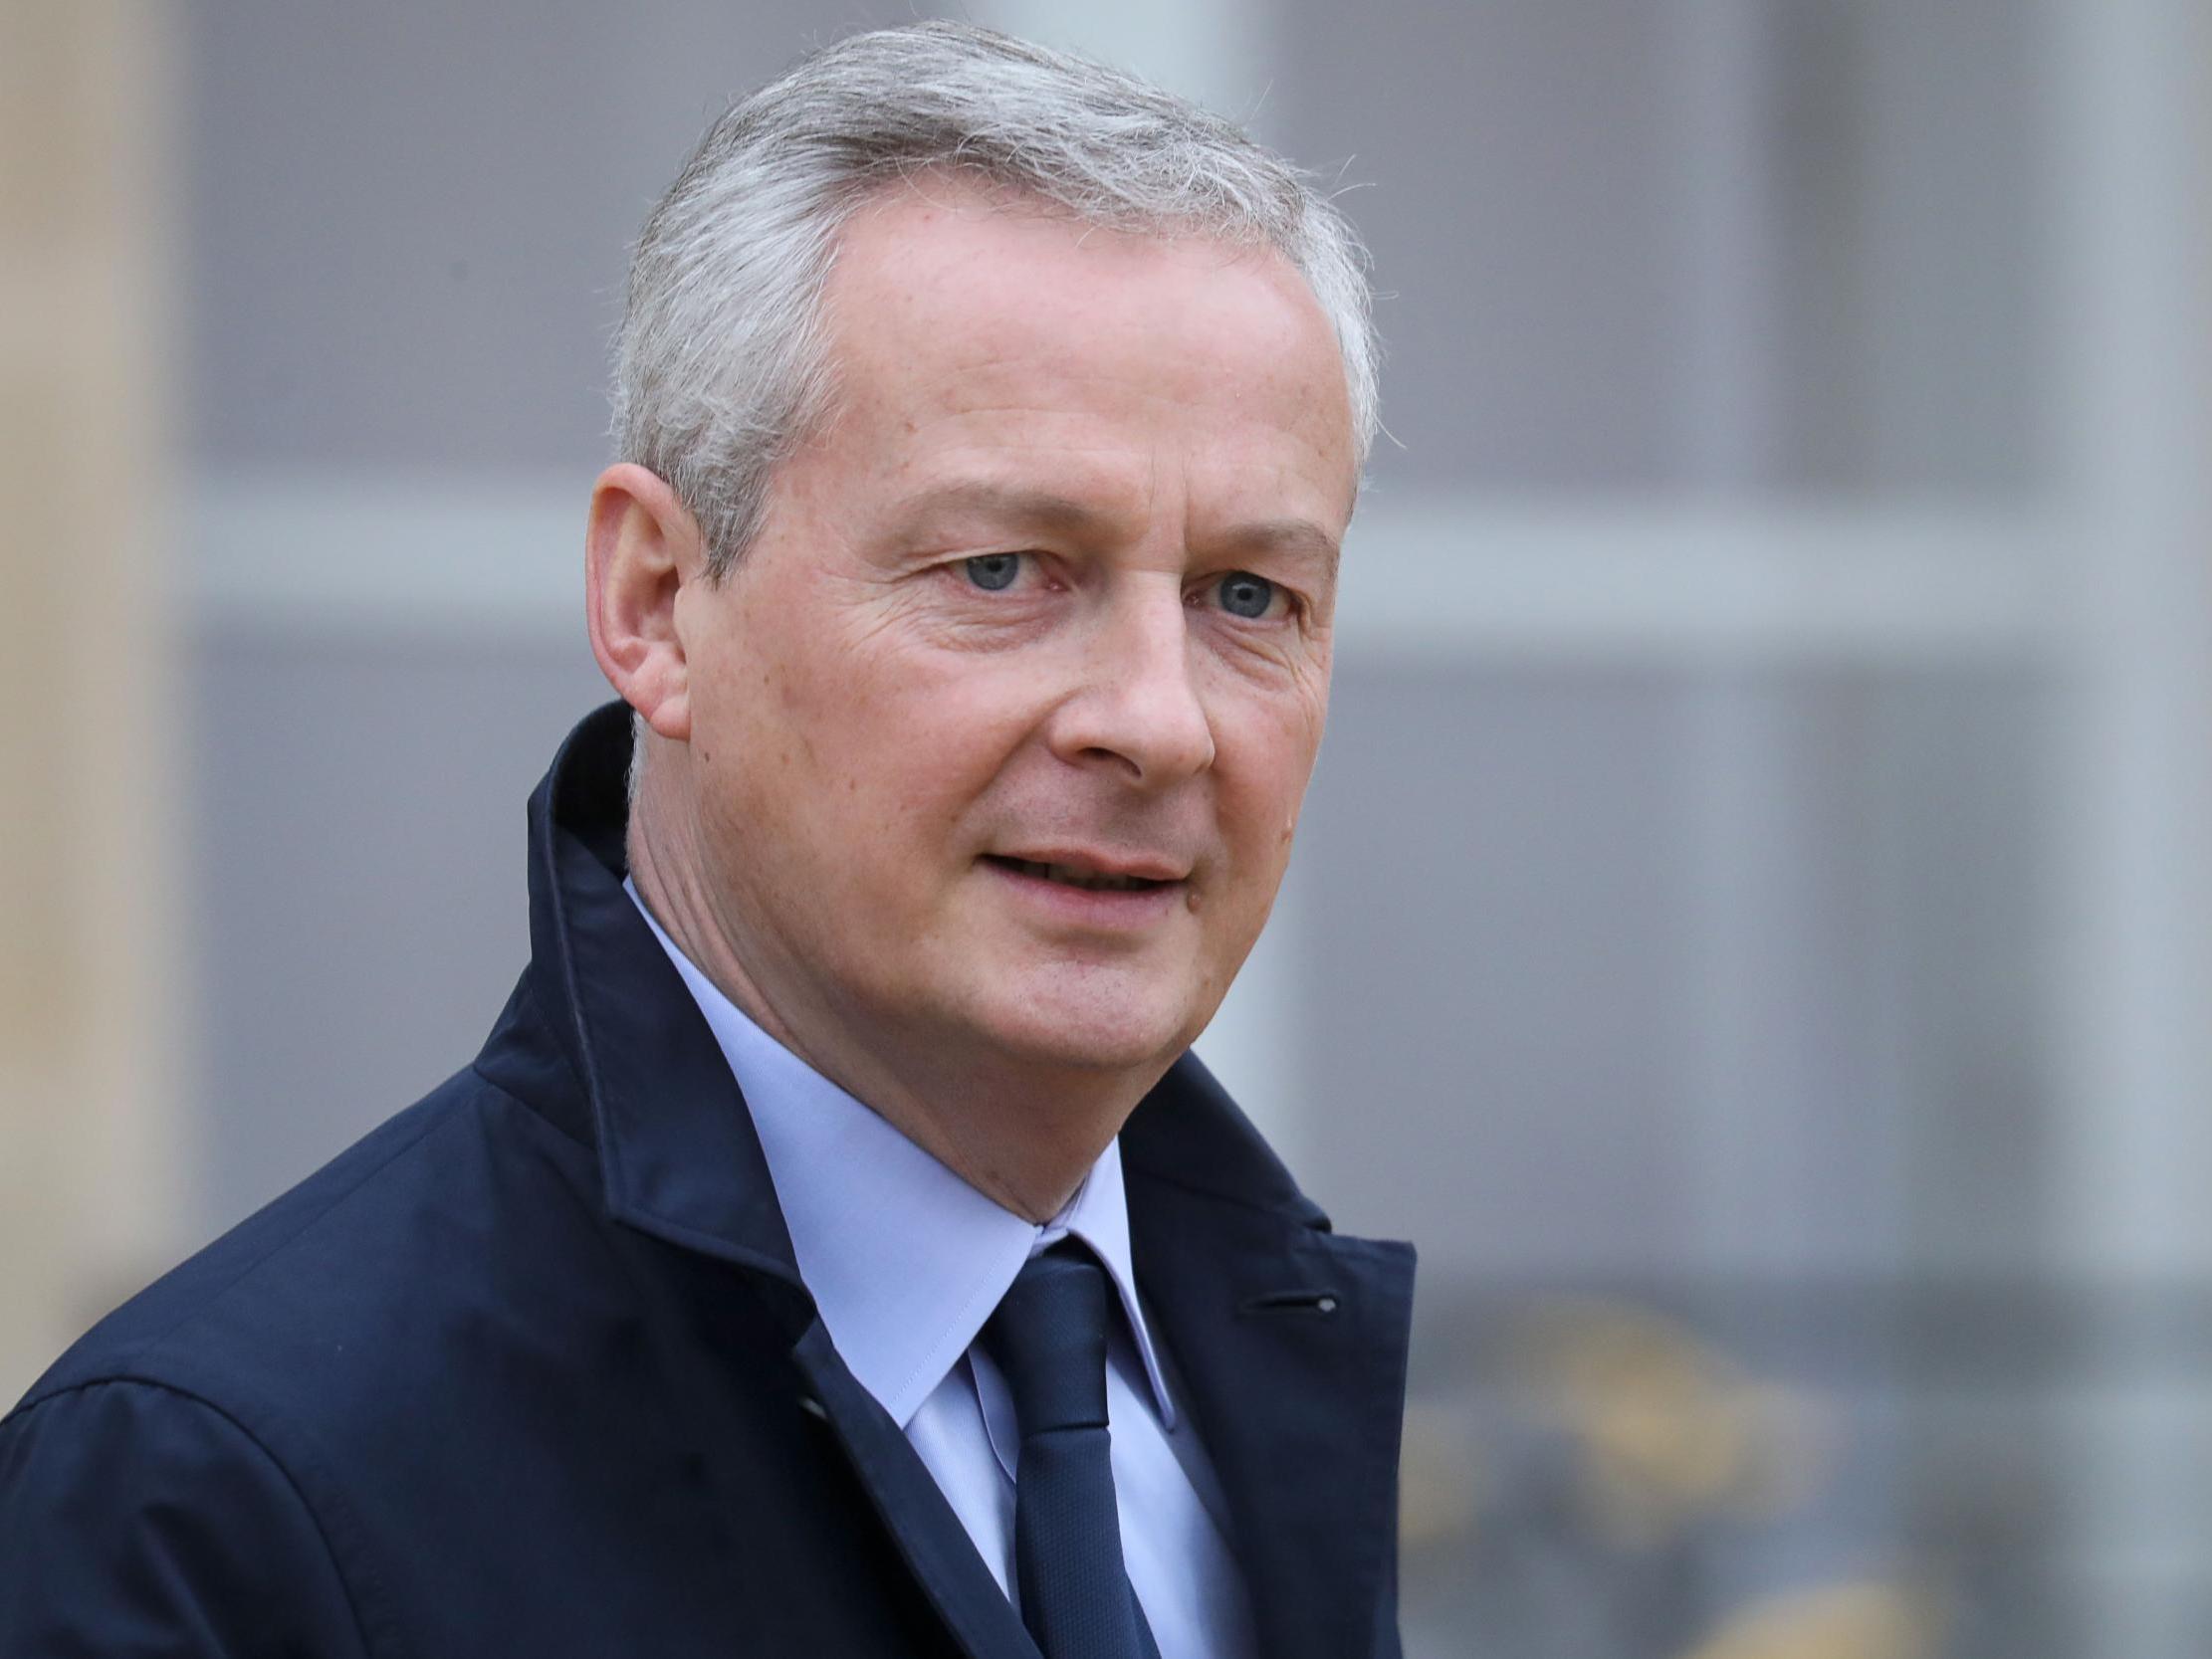 Bruno Le Maire visited an upmarket neighbourhood in Paris on Sunday